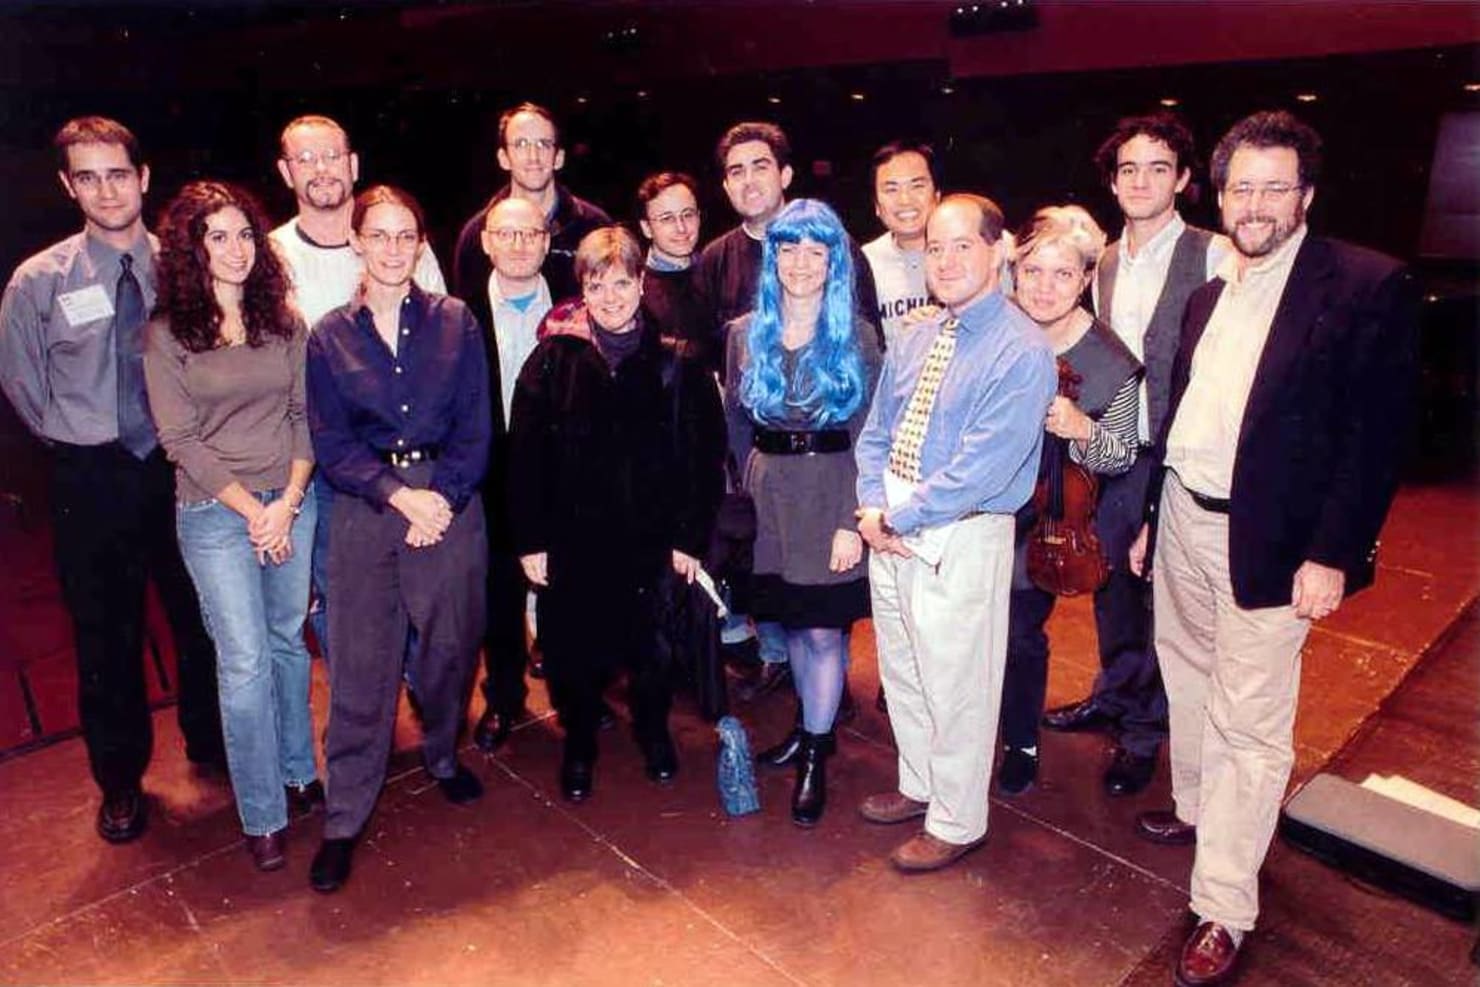 The second Minnesota Orchestra Composer Institute, held in October 2002, featured Todd Coleman, Christopher Dietz, Lu Pei, Russell Platt, Erich Stem, Nathan Stumpff, Michael Twomey and Orianna Webb, shown here with faculty members and program leaders during Halloween week.